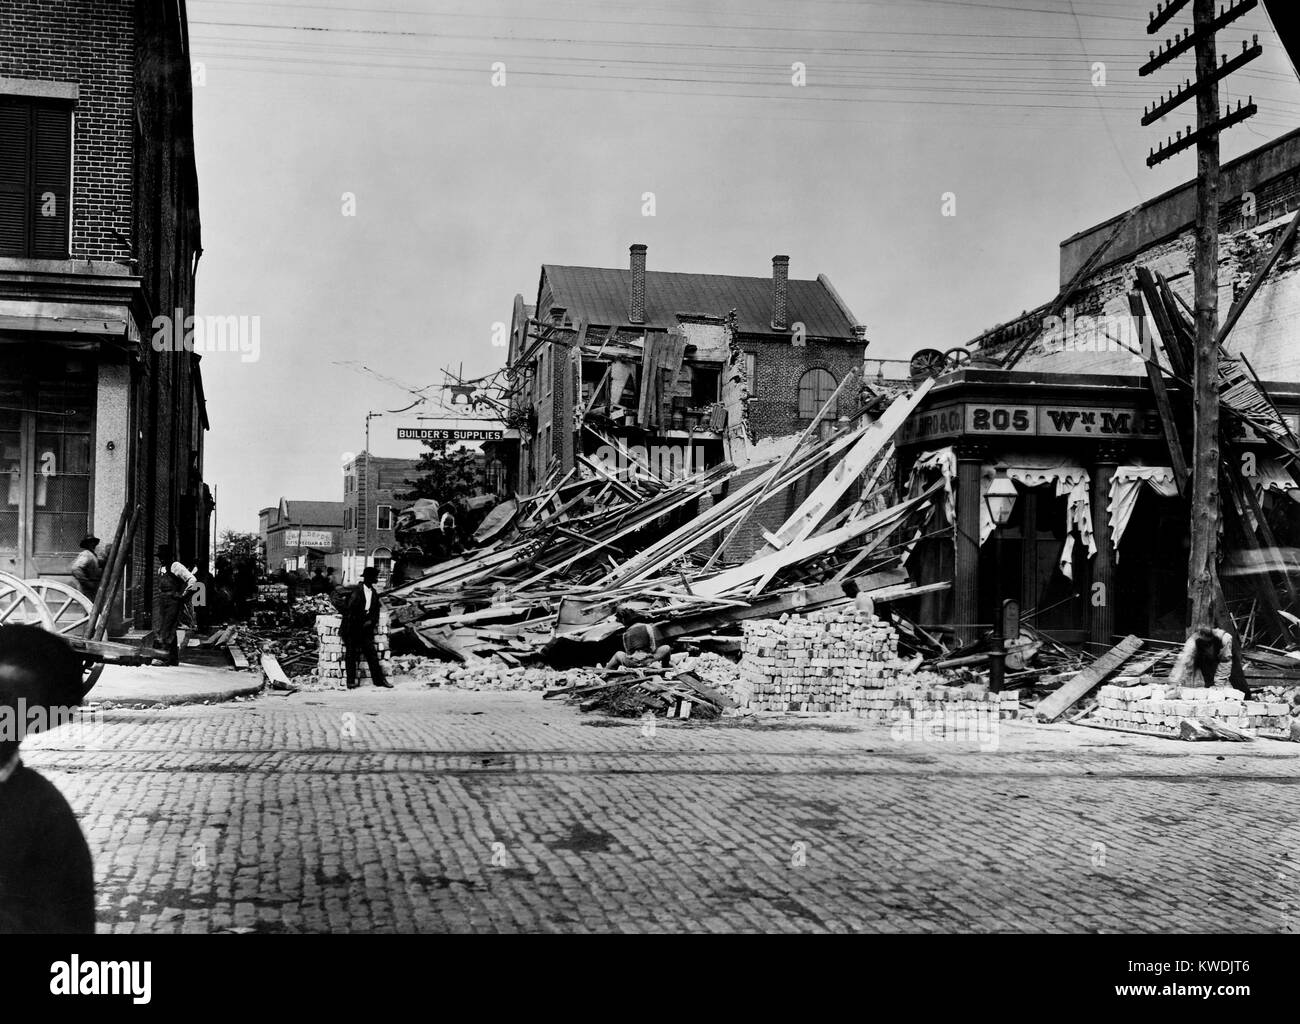 Destruction on East Bay and Cumberland Street, Charleston, after the earthquake of August 31, 1886. William Bird Company building was called the worse wreck in the city. Photo by John K. Hillers (BSLOC 2017 17 57) Stock Photo